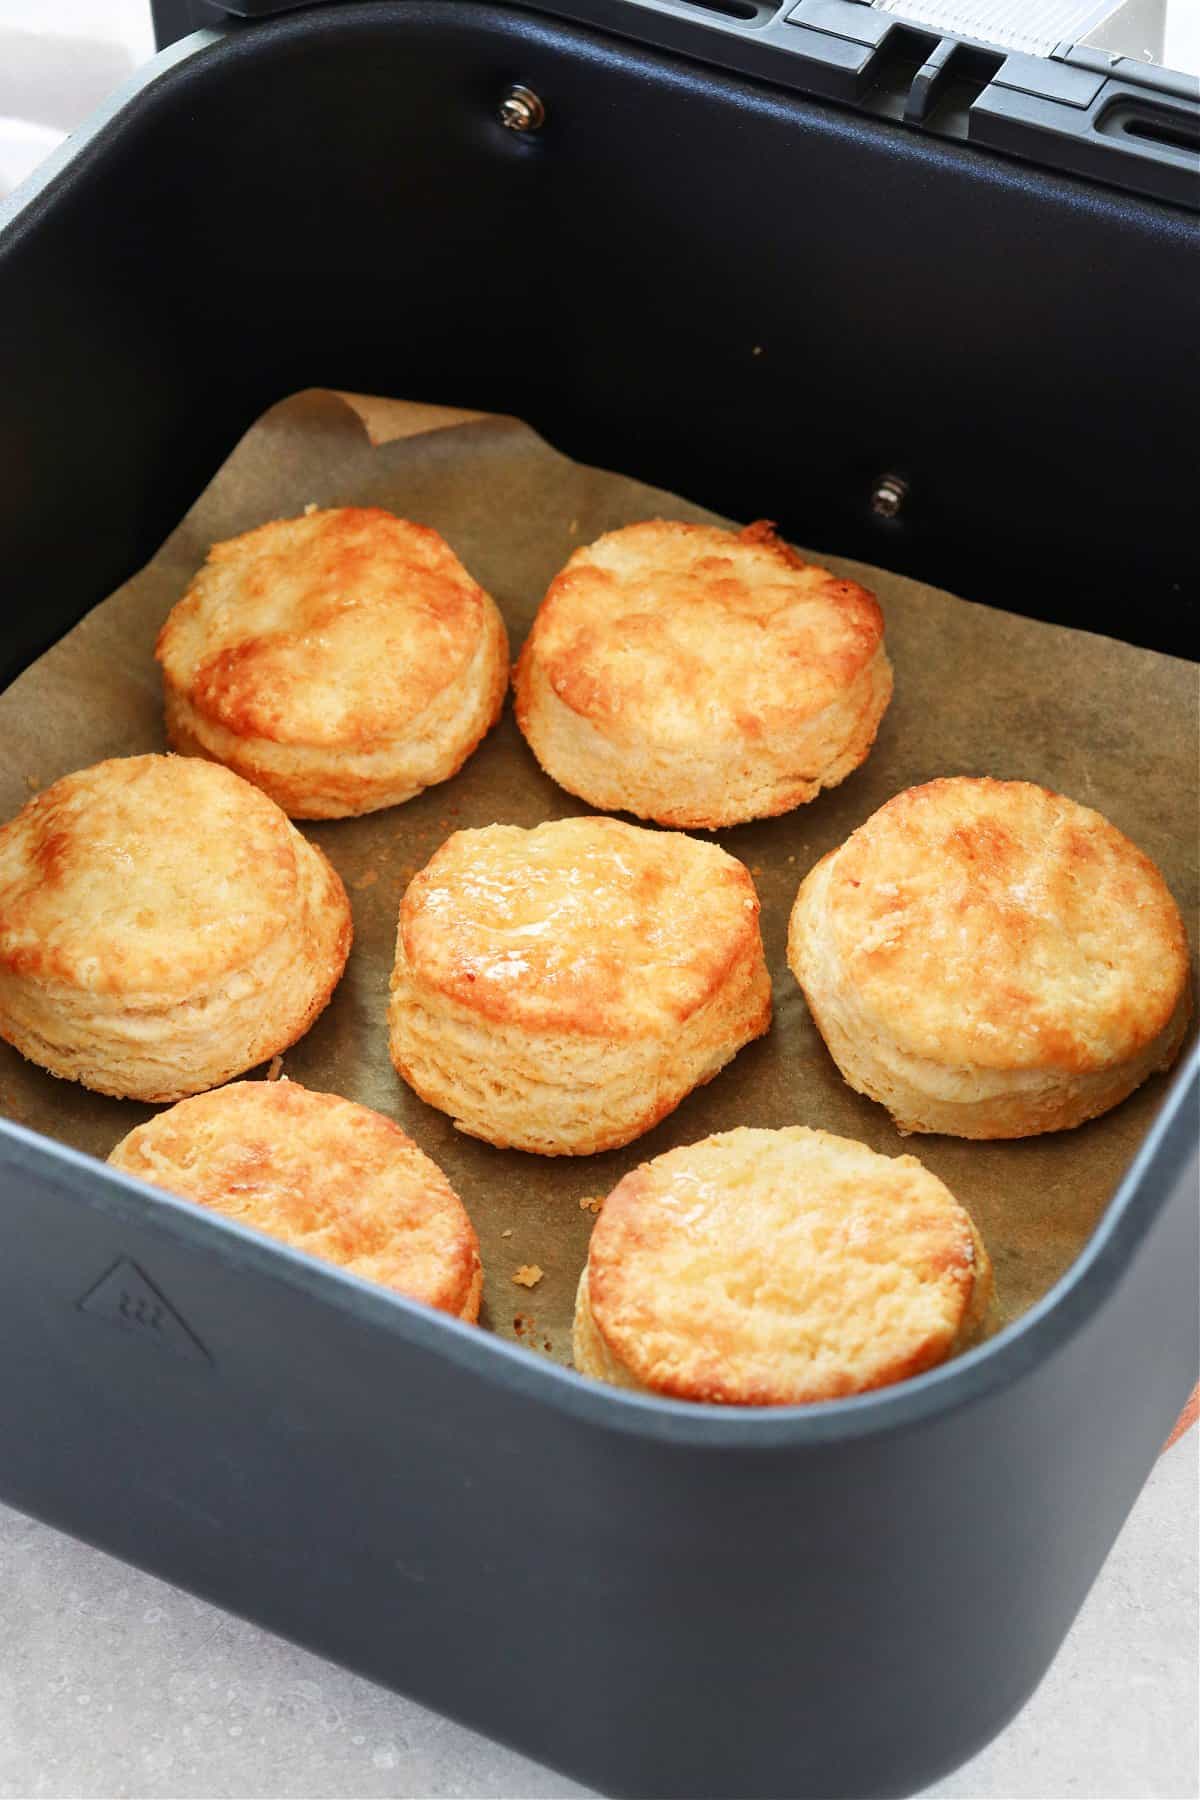 Baked biscuits in the air fryer basket.